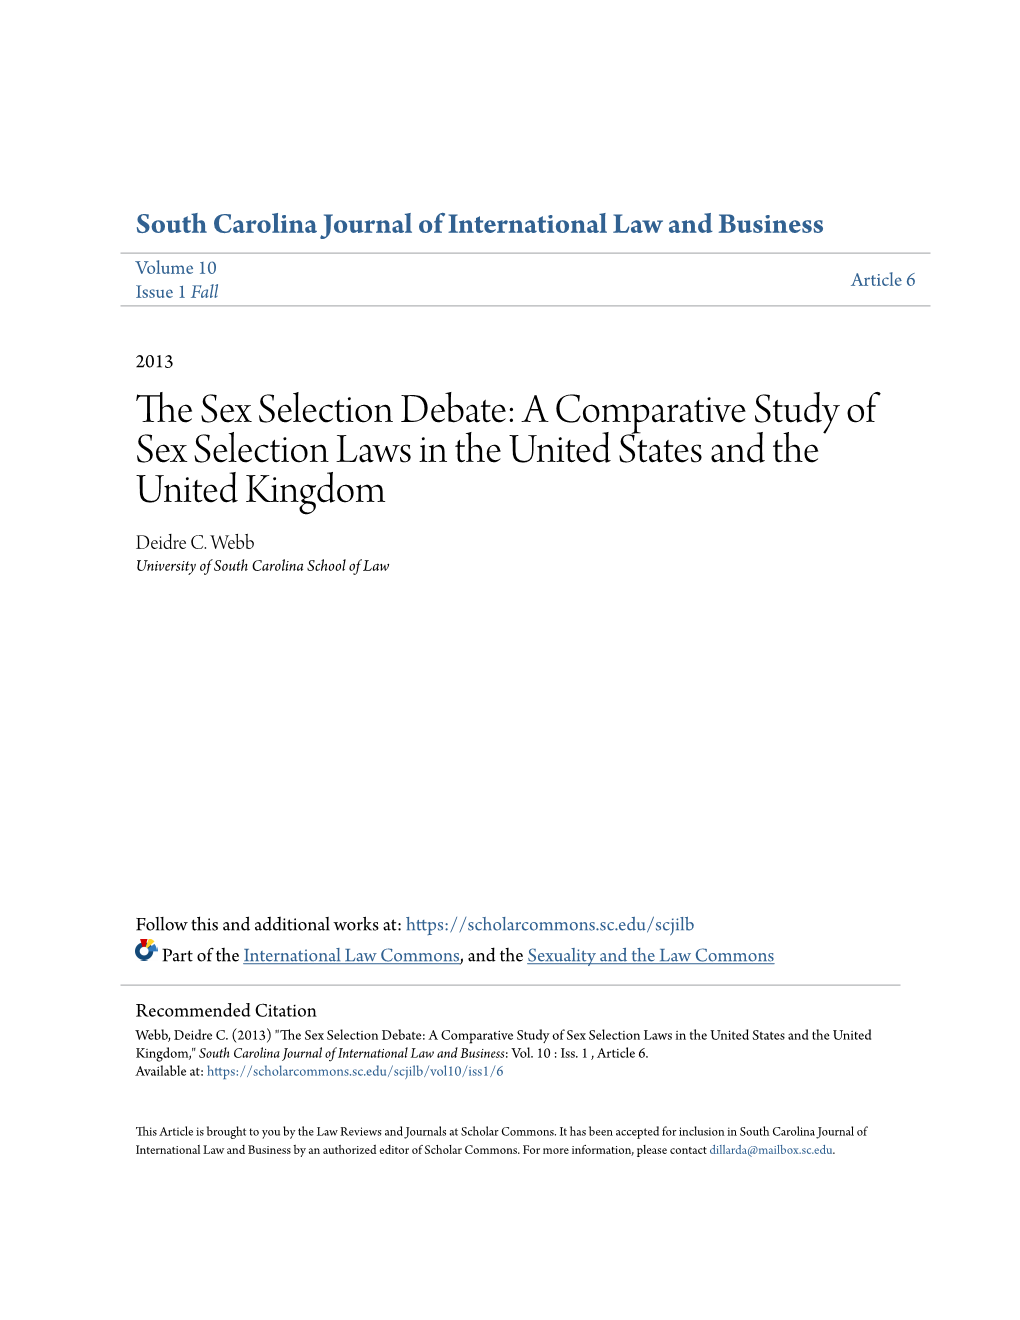 A Comparative Study of Sex Selection Laws in the United States and the United Kingdom Deidre C